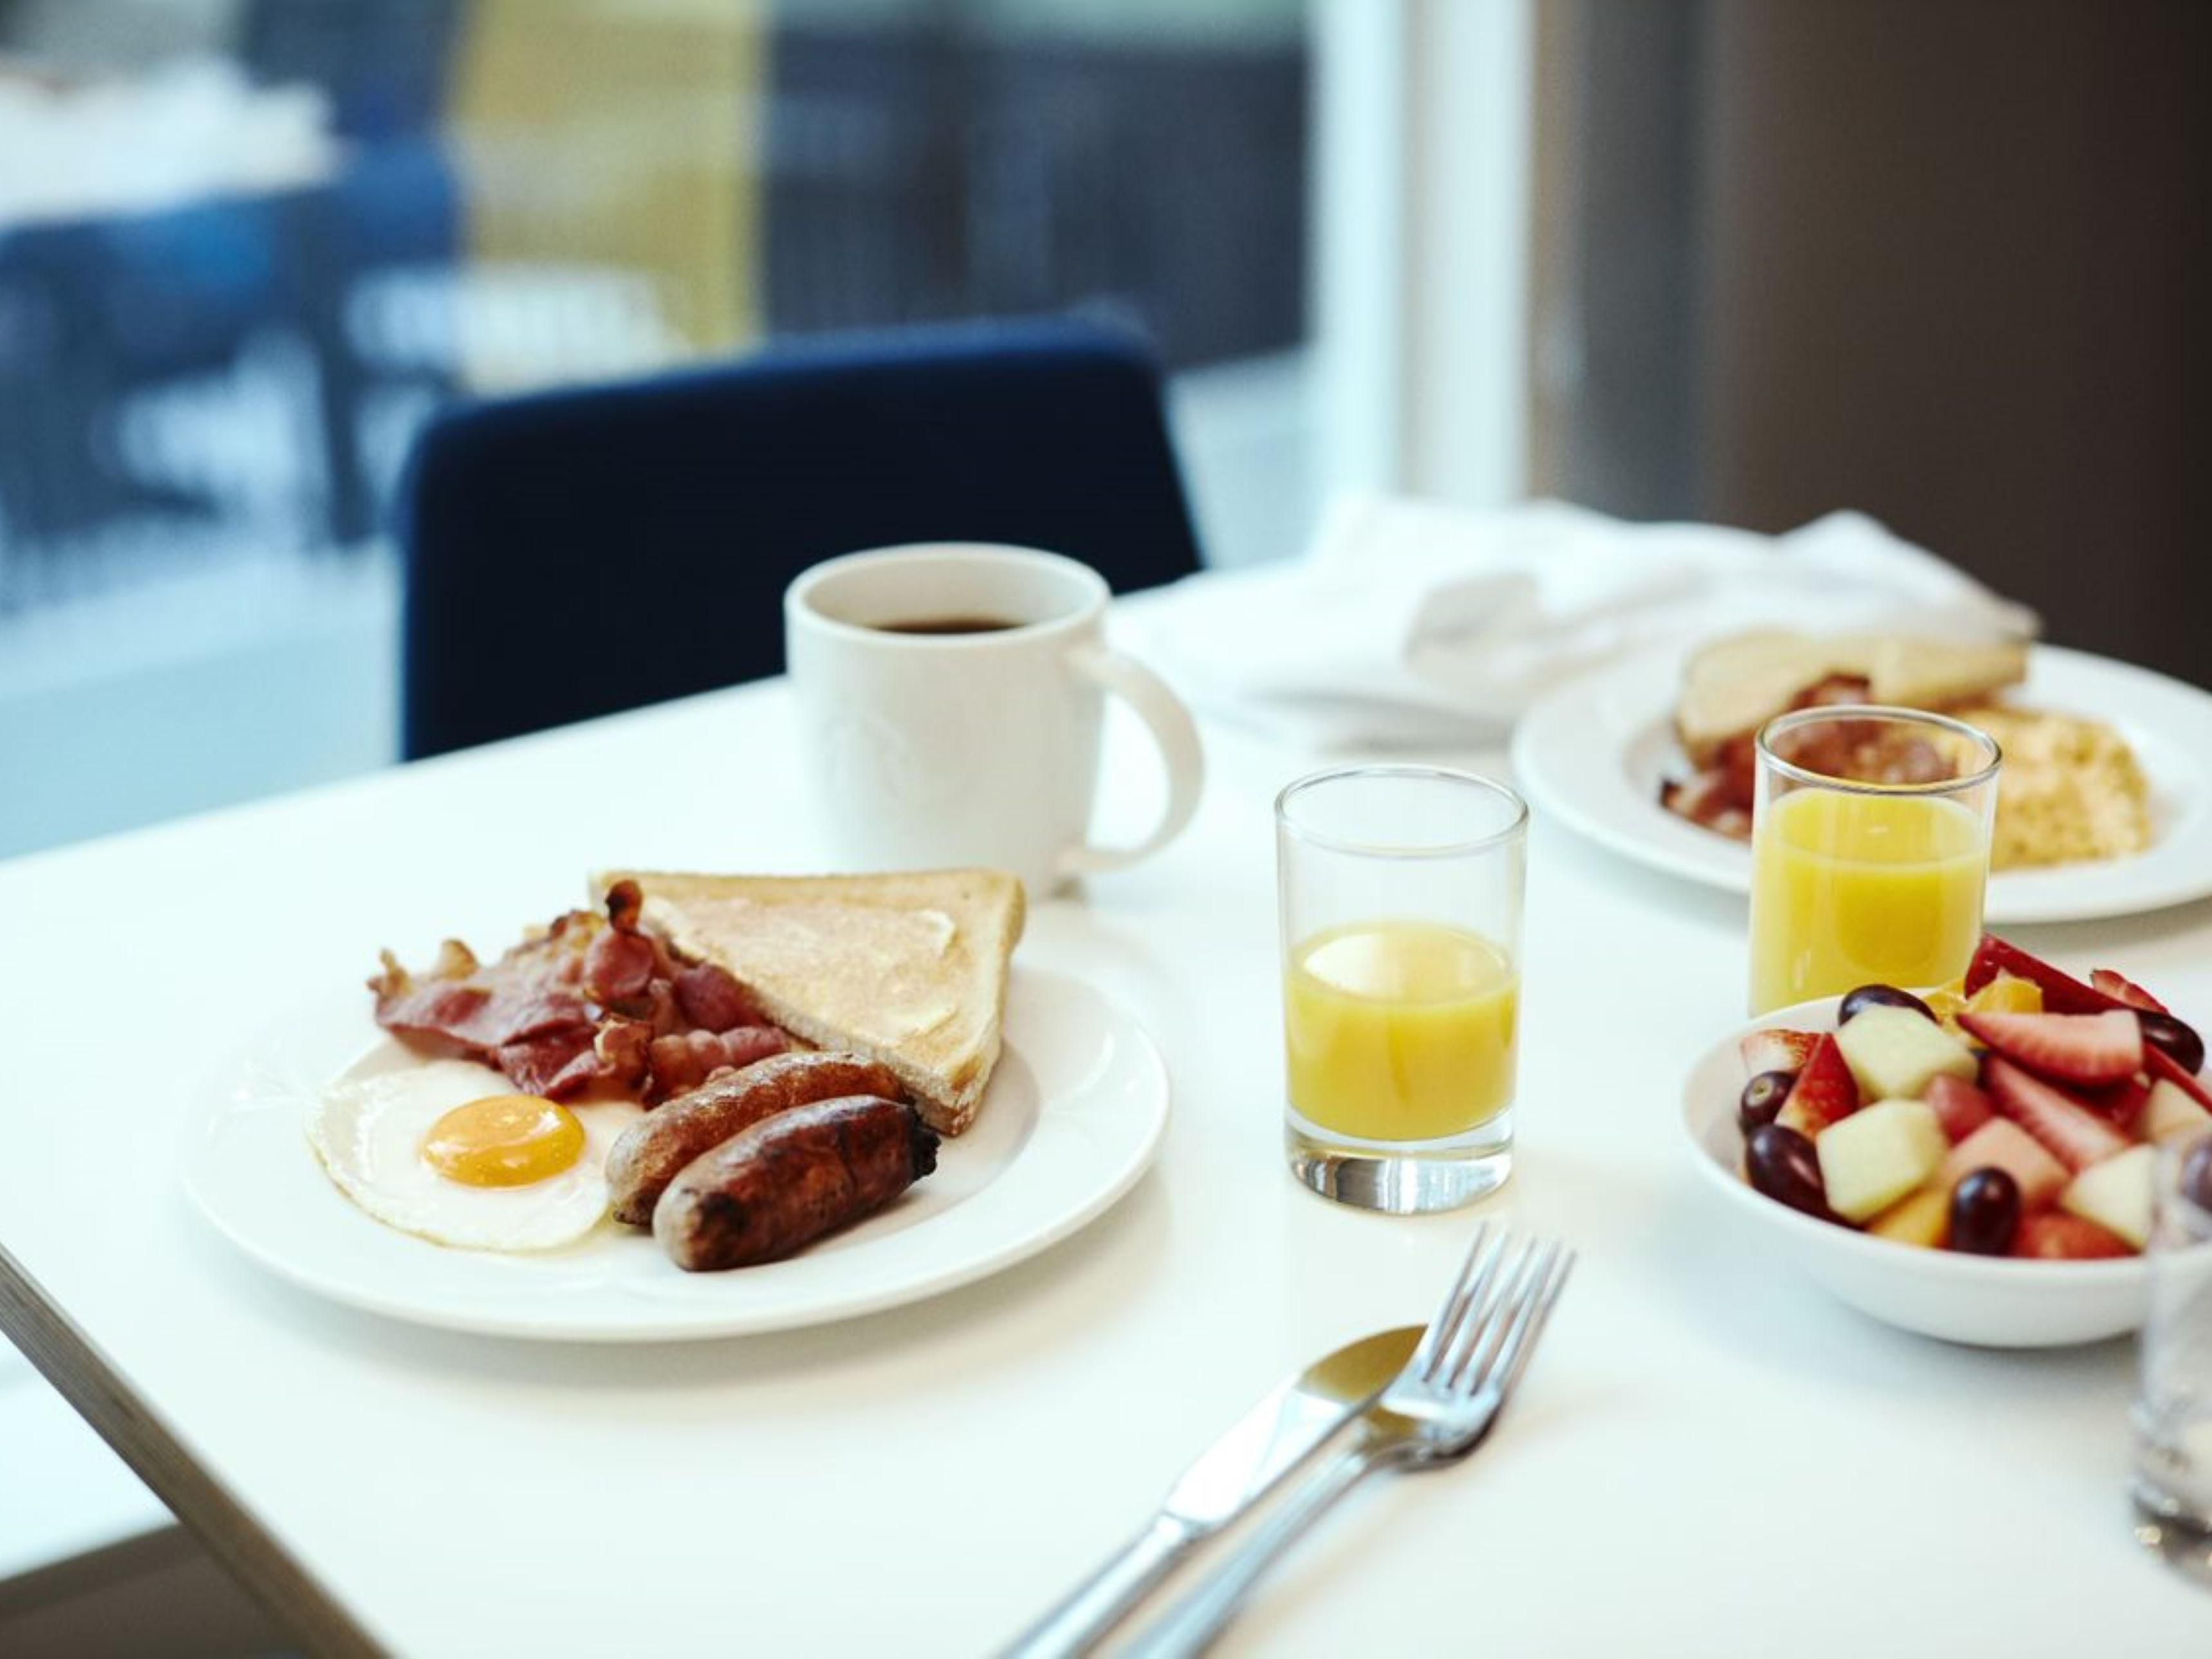 Start the day with our breakfast served daily, featuring a range of delicious hot and cold items -- sure to please everyone!

Restaurant and full-service bar is open from 4:30 - 10:30PM every day of the week so that you can kick back and relax during your stay with us.
